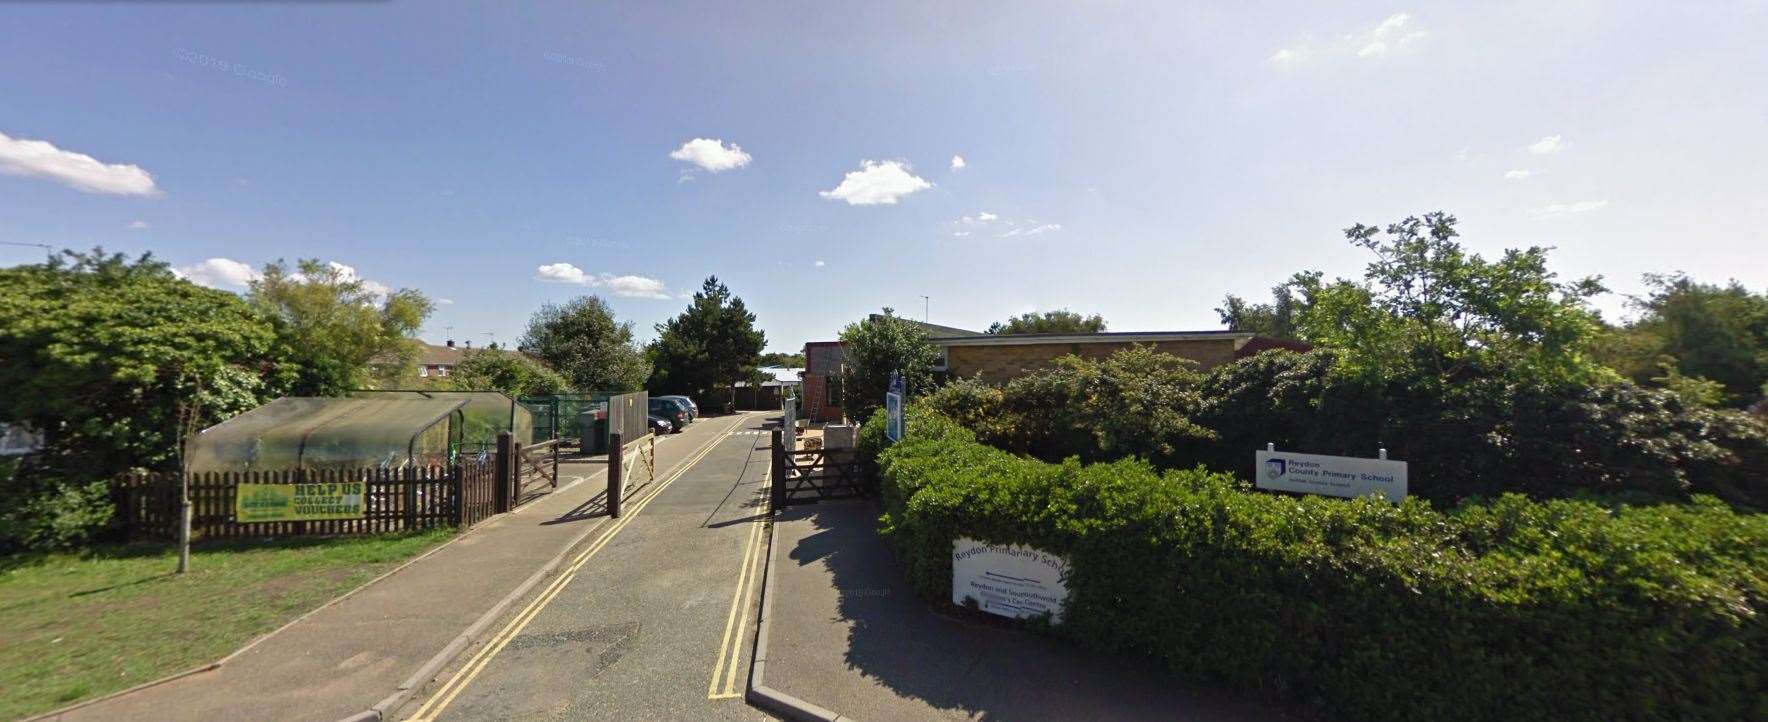 Brambles Nursery, which is next to Reydon Primary School, is in Cllr Beavan's Southwold ward. Picture: Google Maps